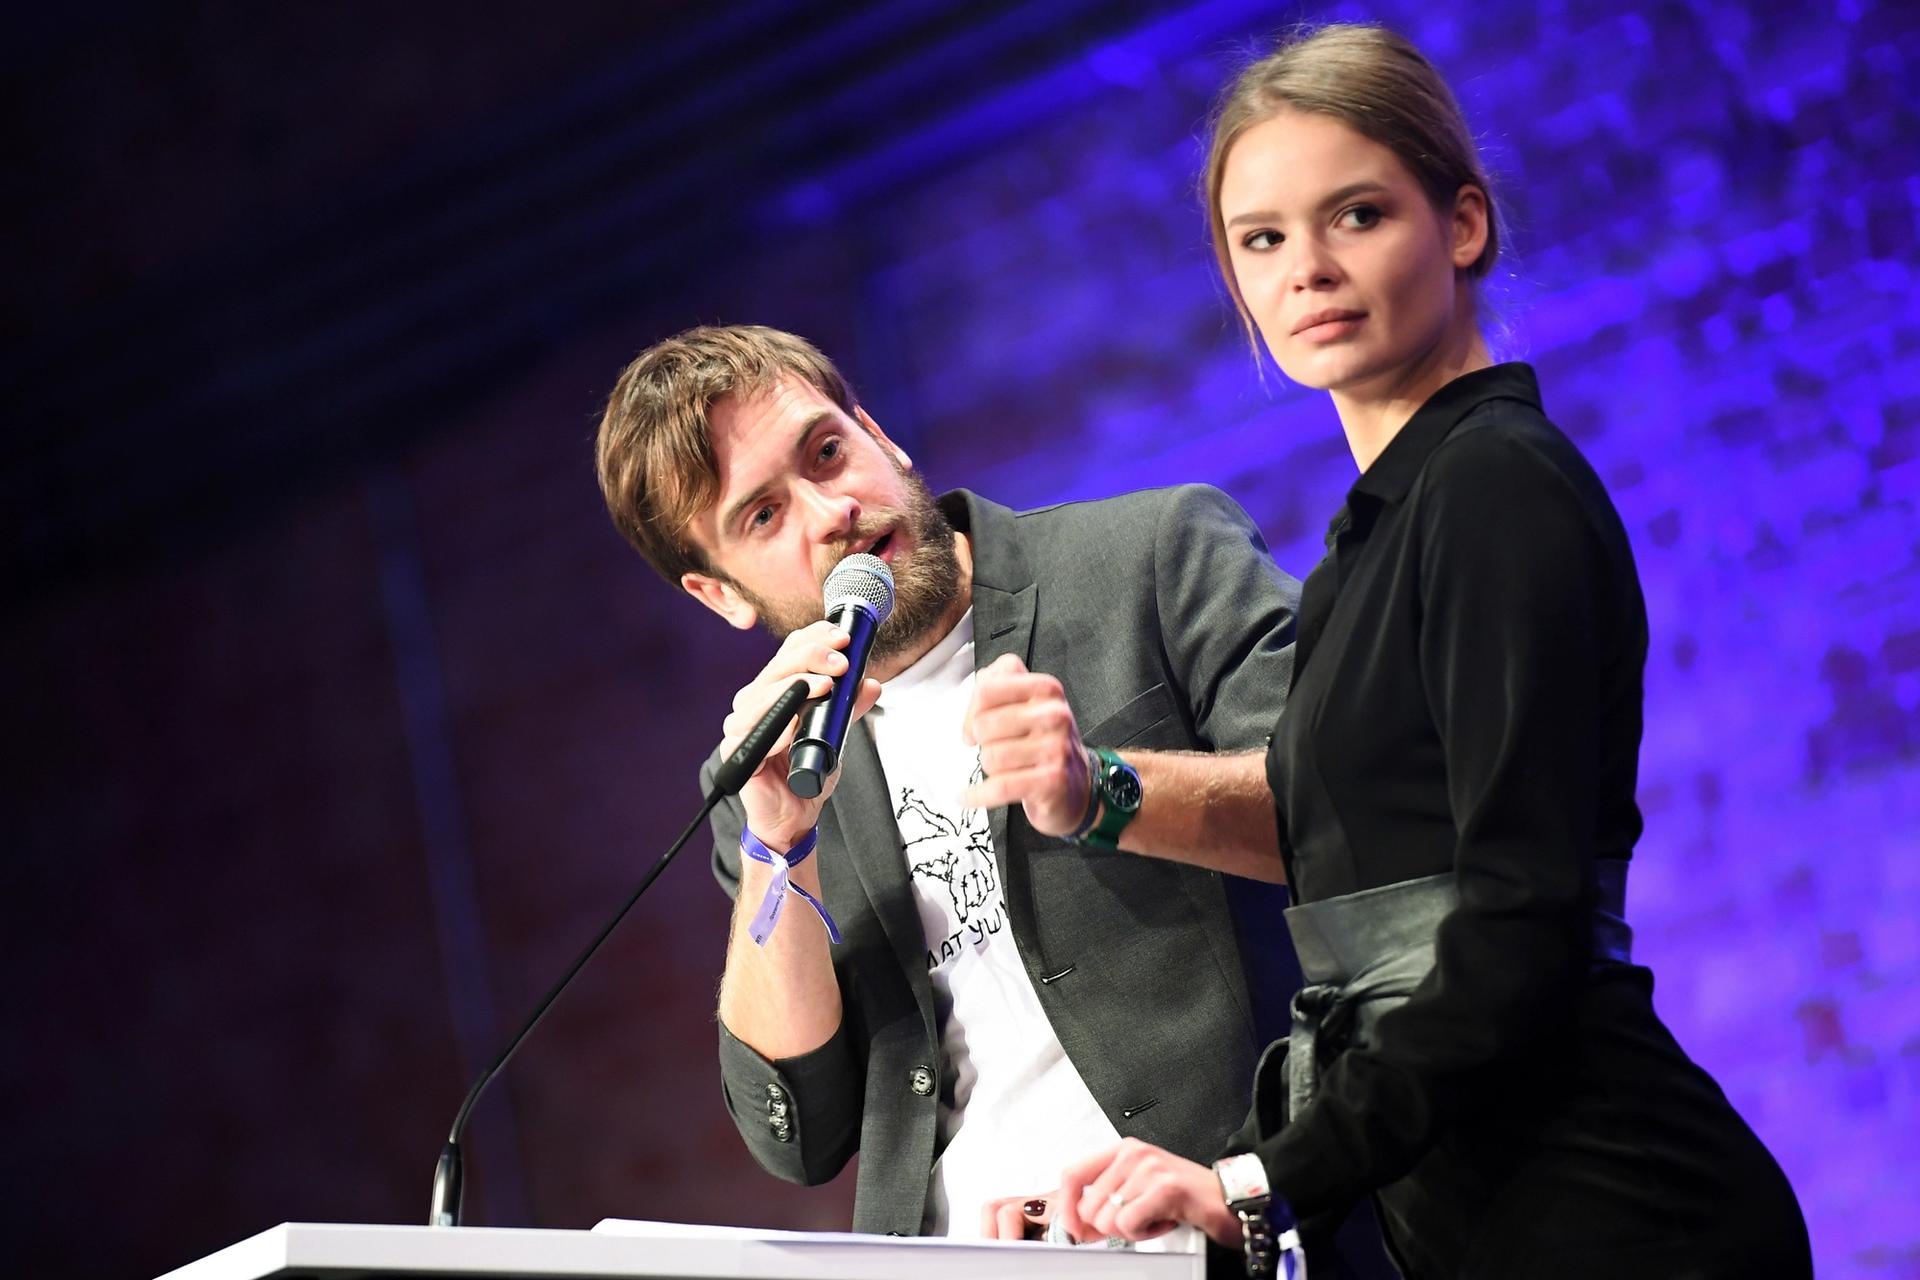 Veronika Nikulshina from Pussy Riot and Pyotr Verzilov at the Cinema for Peace Gala in Germany earlier this year Photo by: Britta Pedersen/picture-alliance/dpa/AP Images